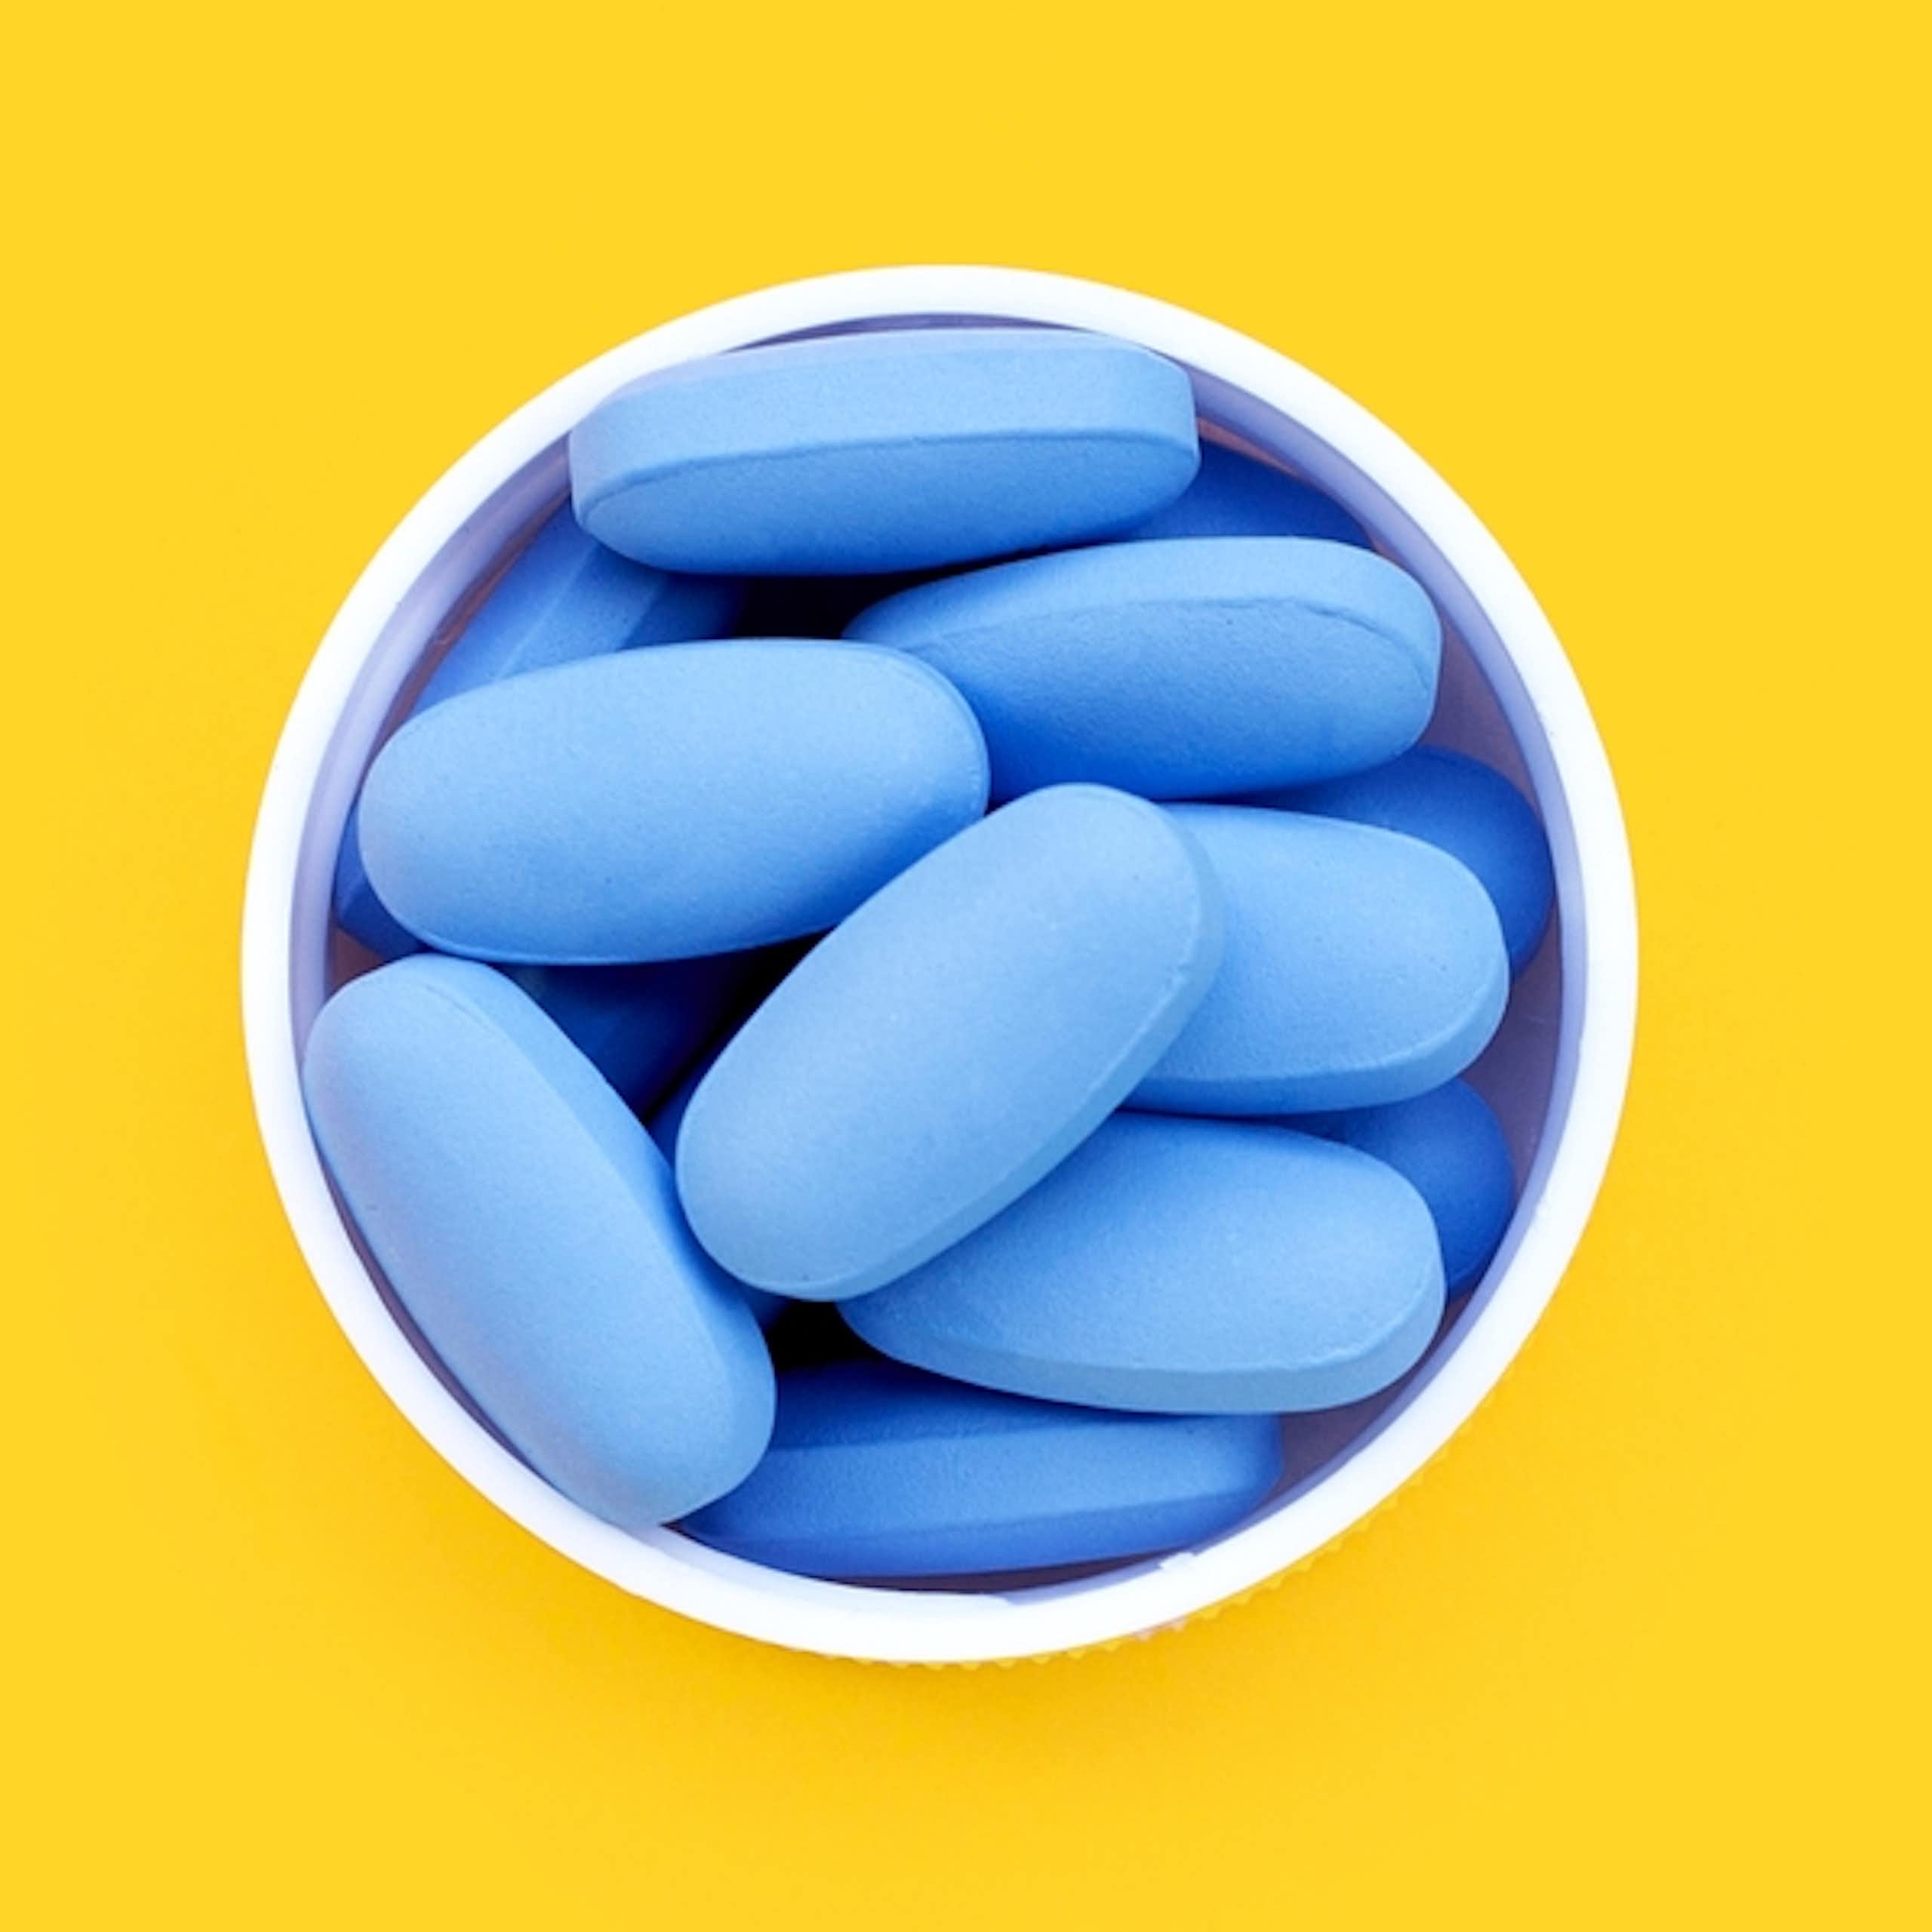 Top view of blue pills in white cup against yellow background